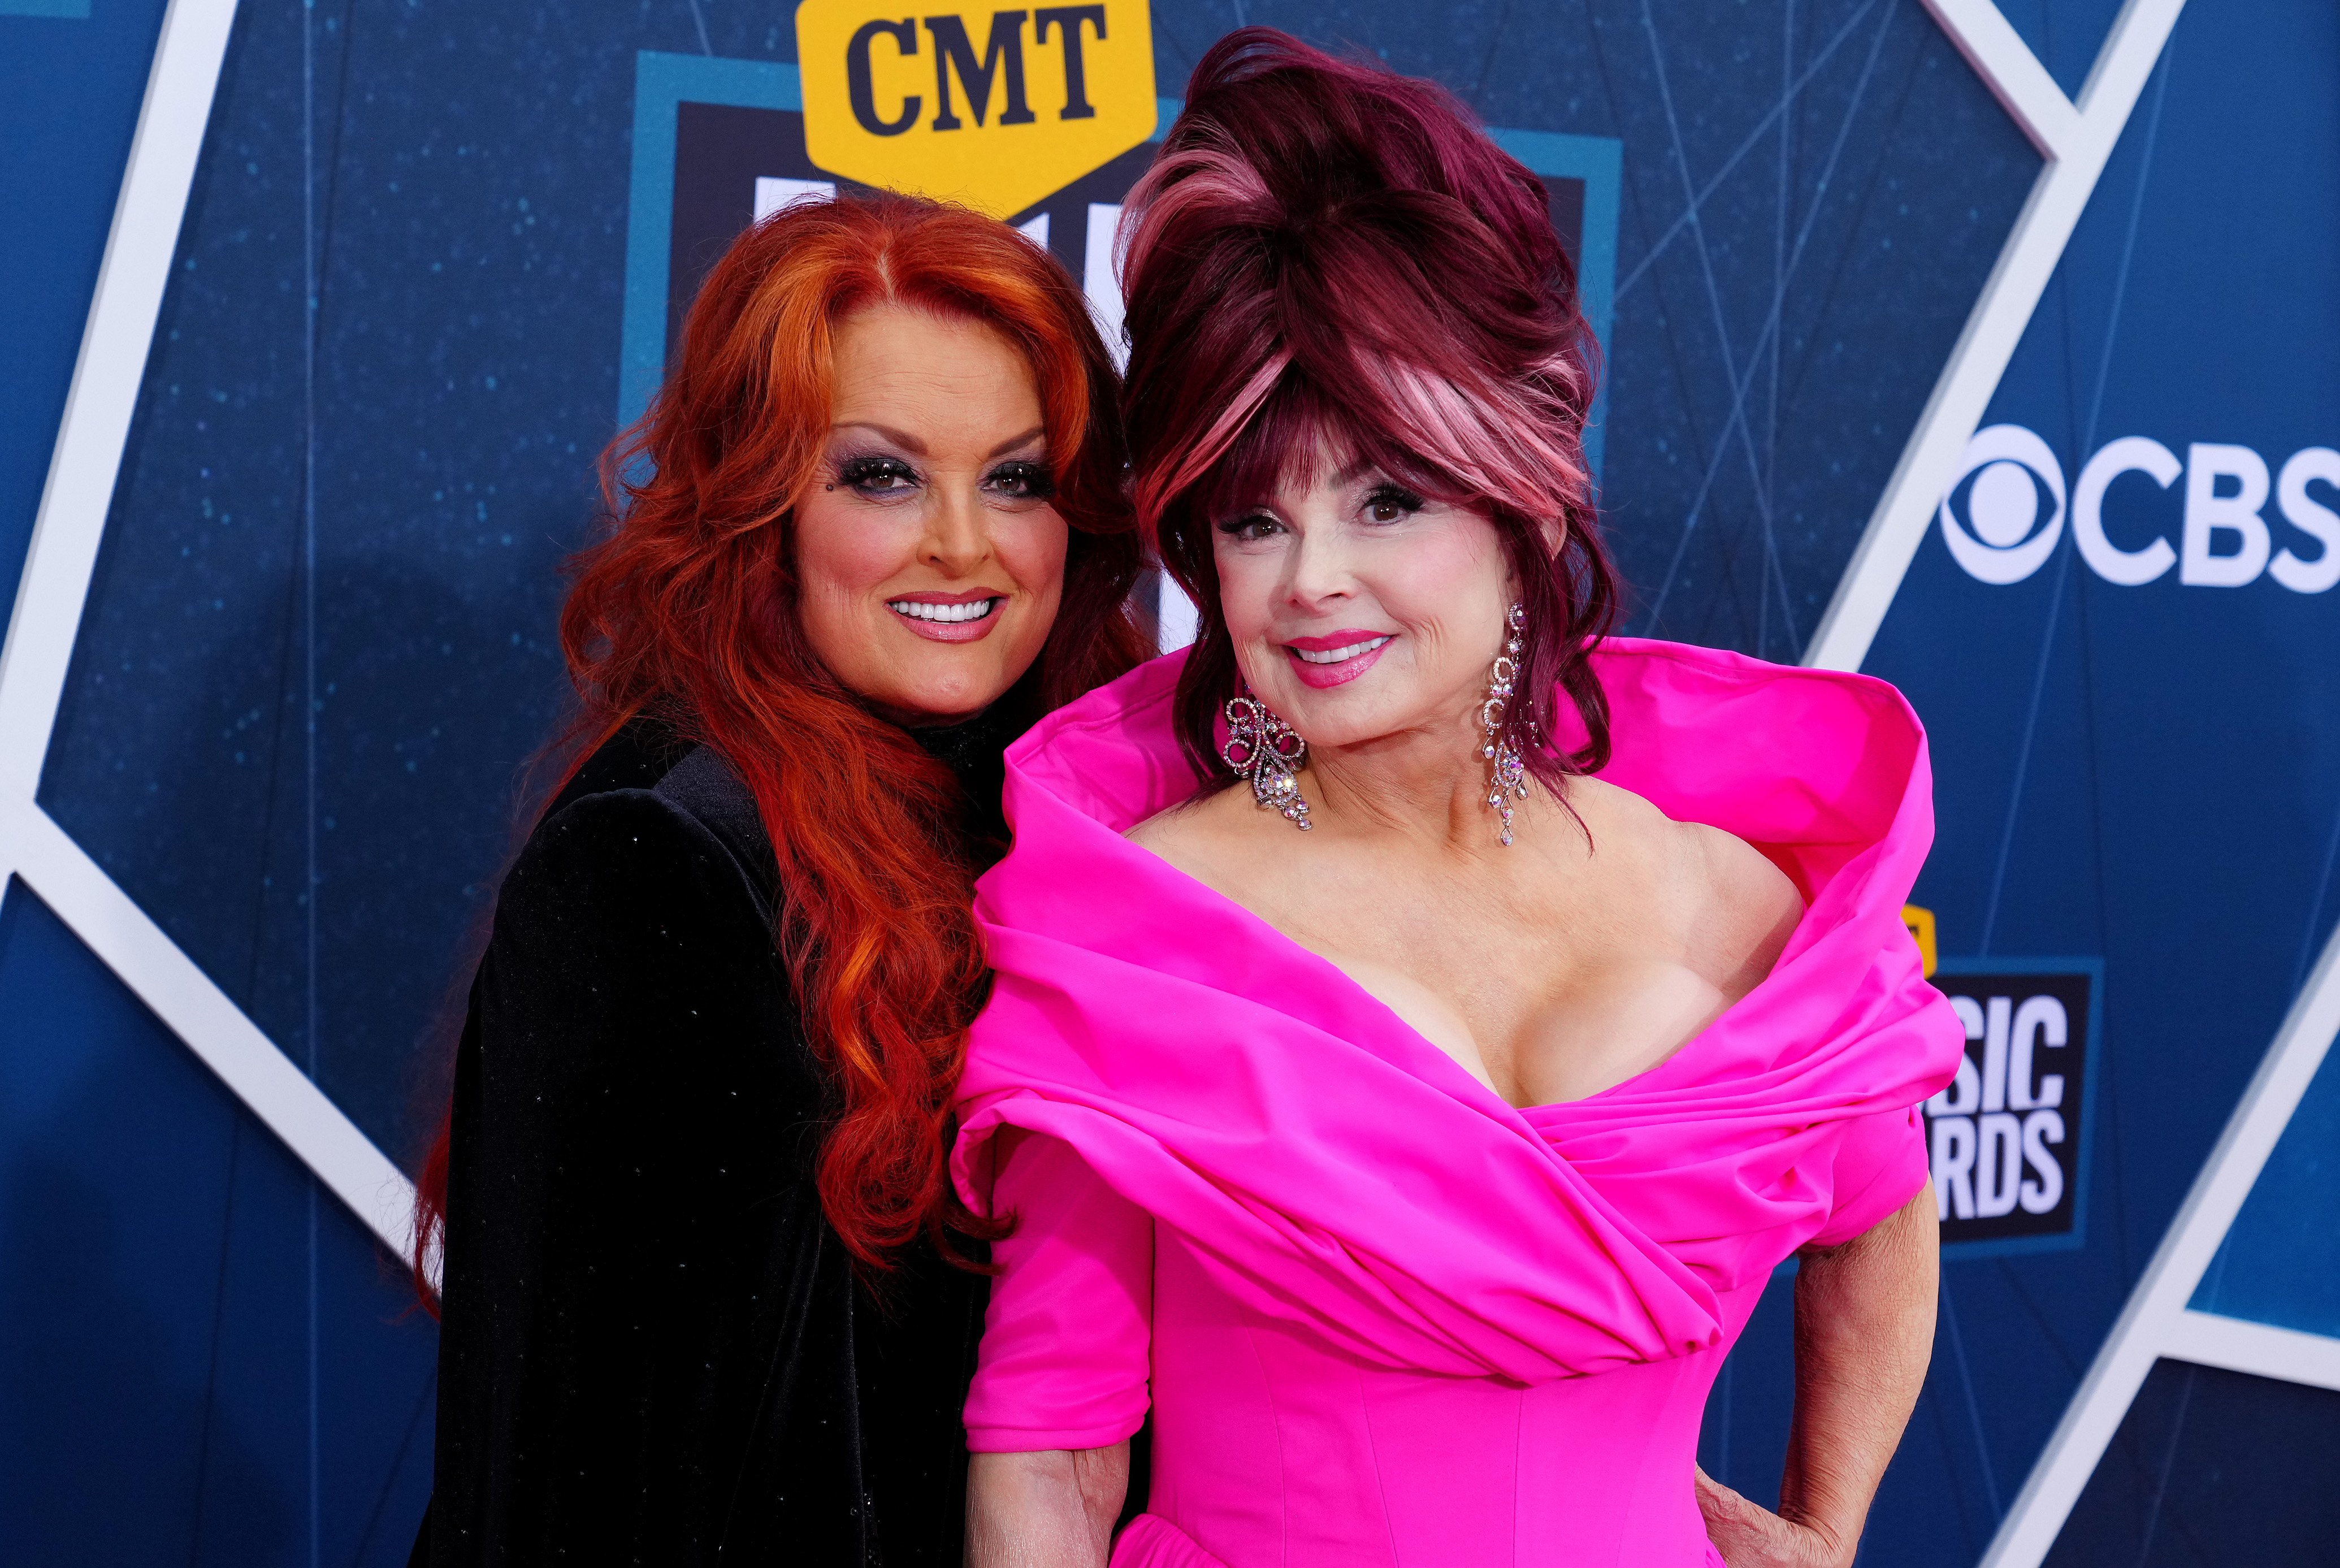 Wynonna Judd and Naomi Judd of The Judds attend the 2022 CMT Music Awards at Nashville Municipal Auditorium on April 11, 2022 in Nashville, Tennessee | Source: Getty Images